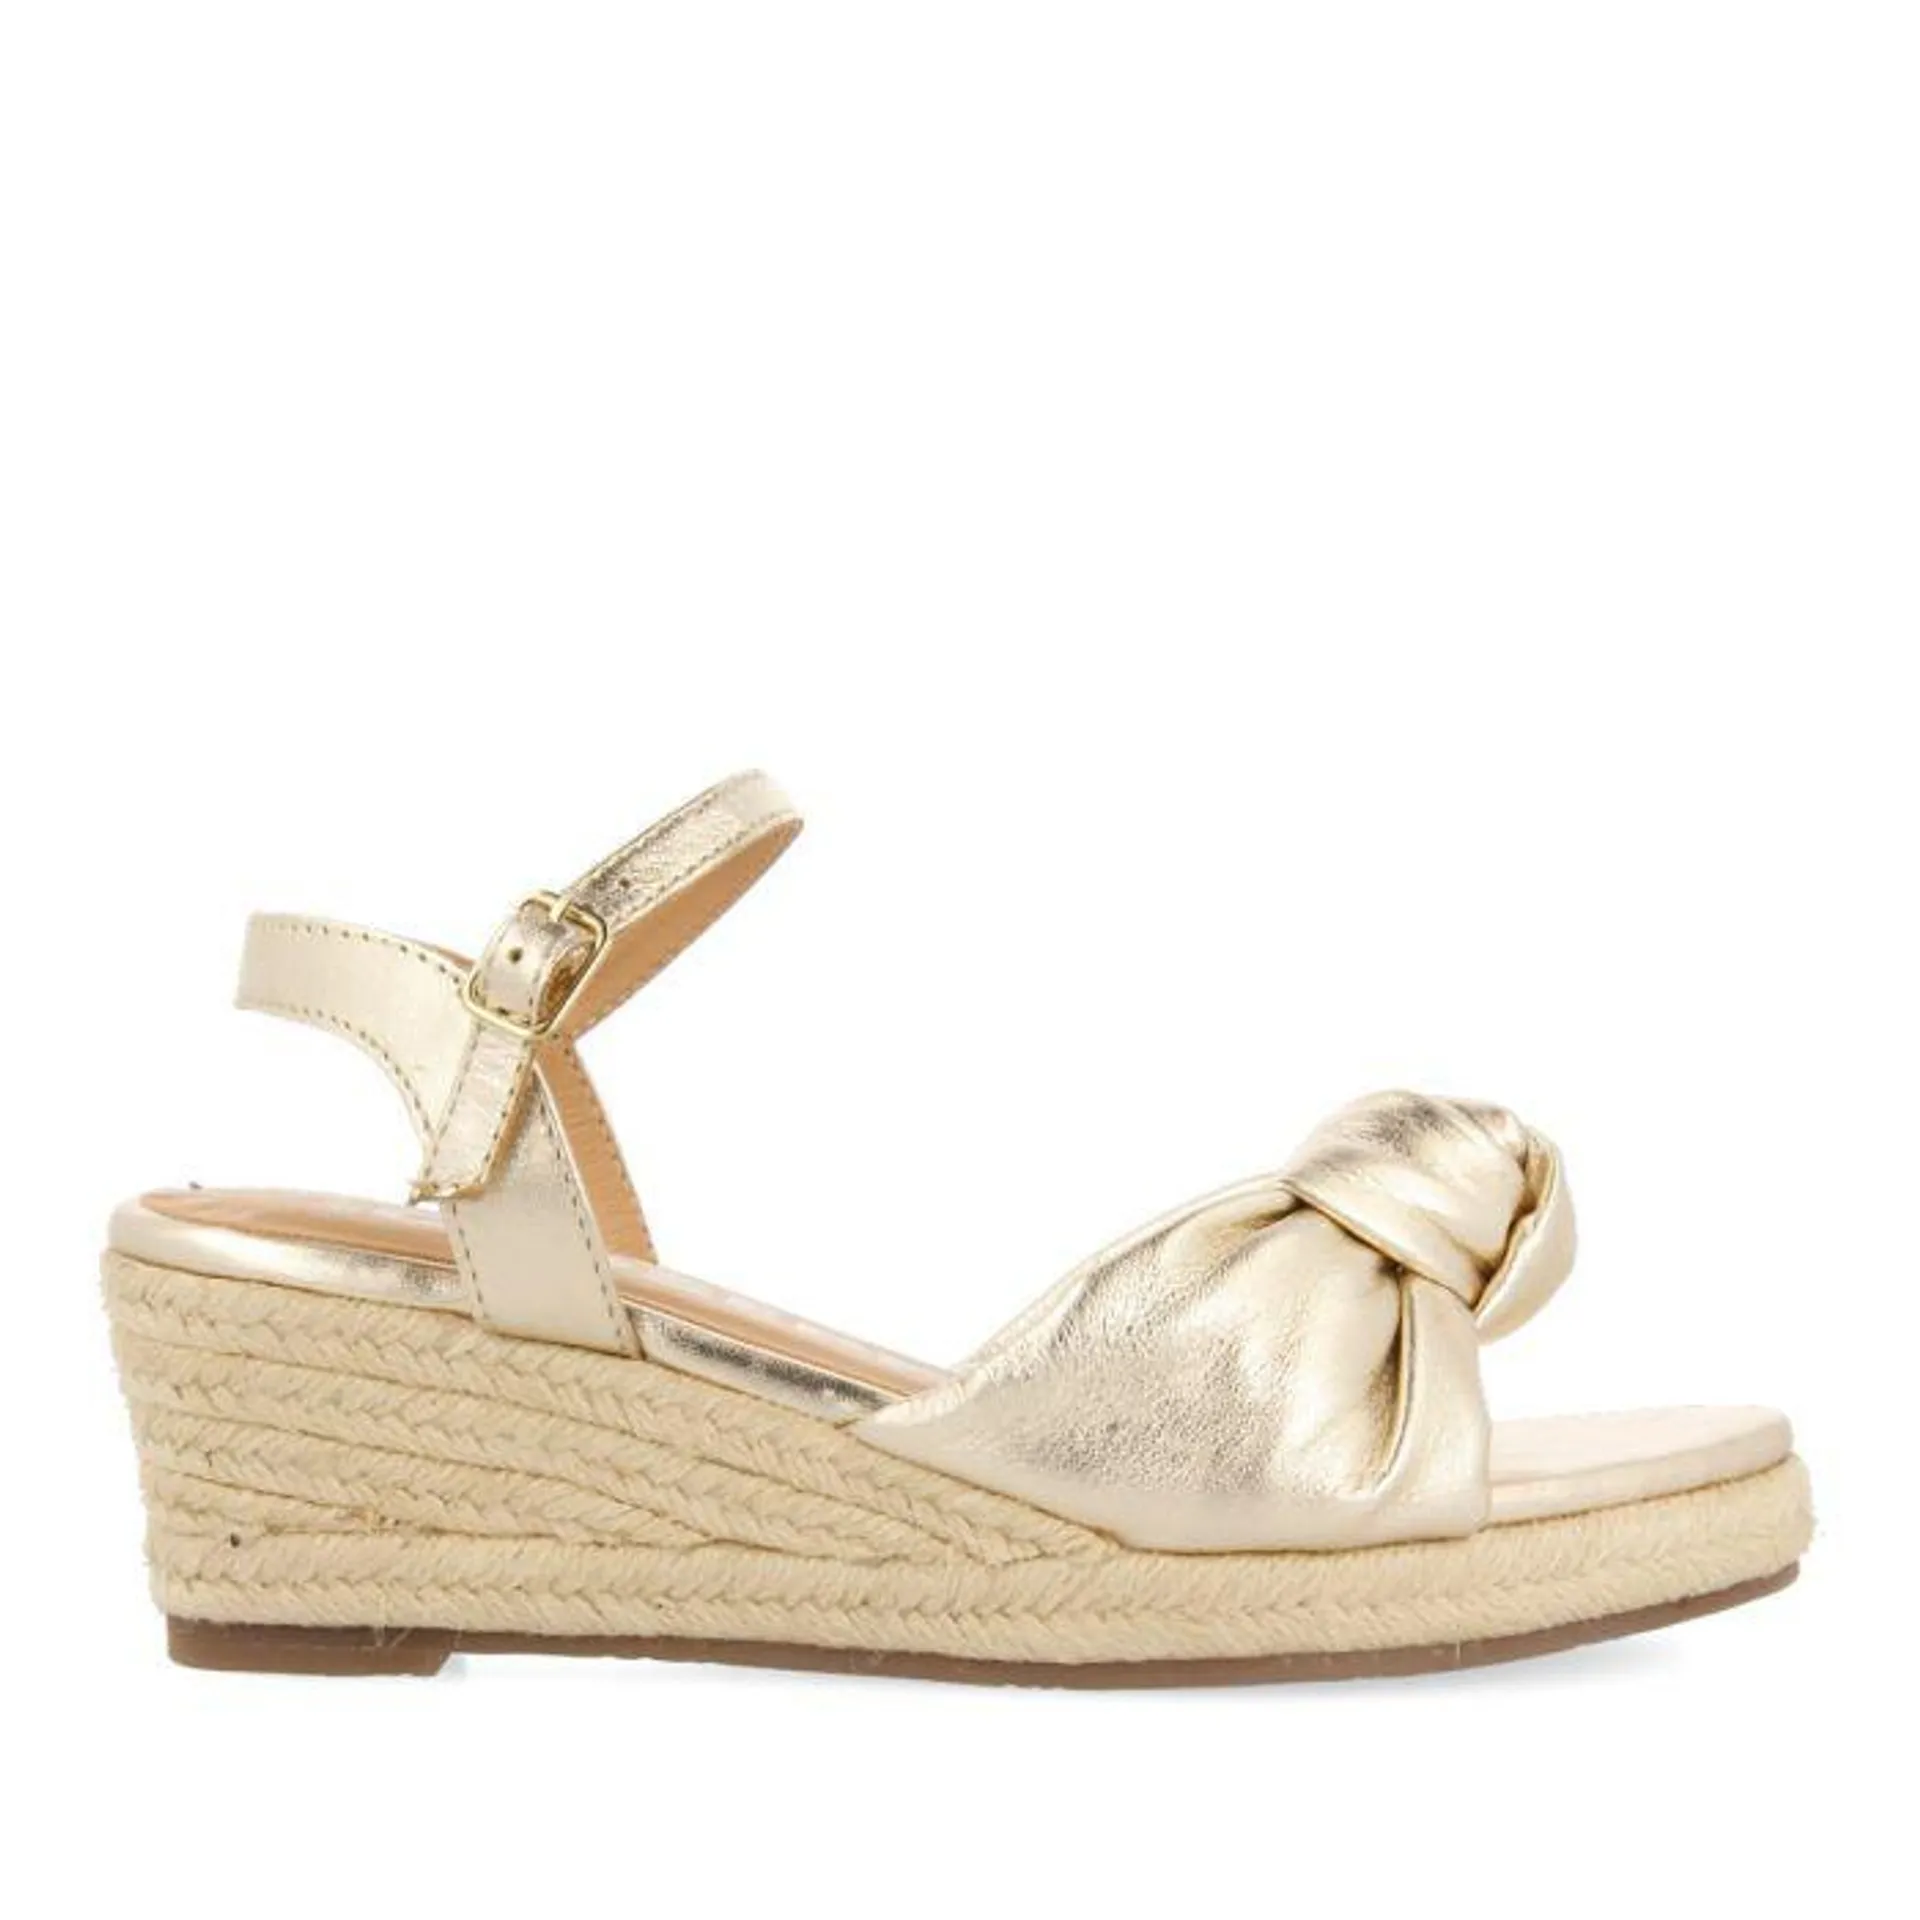 Gamboa women's gold leather sandals with jute wedges